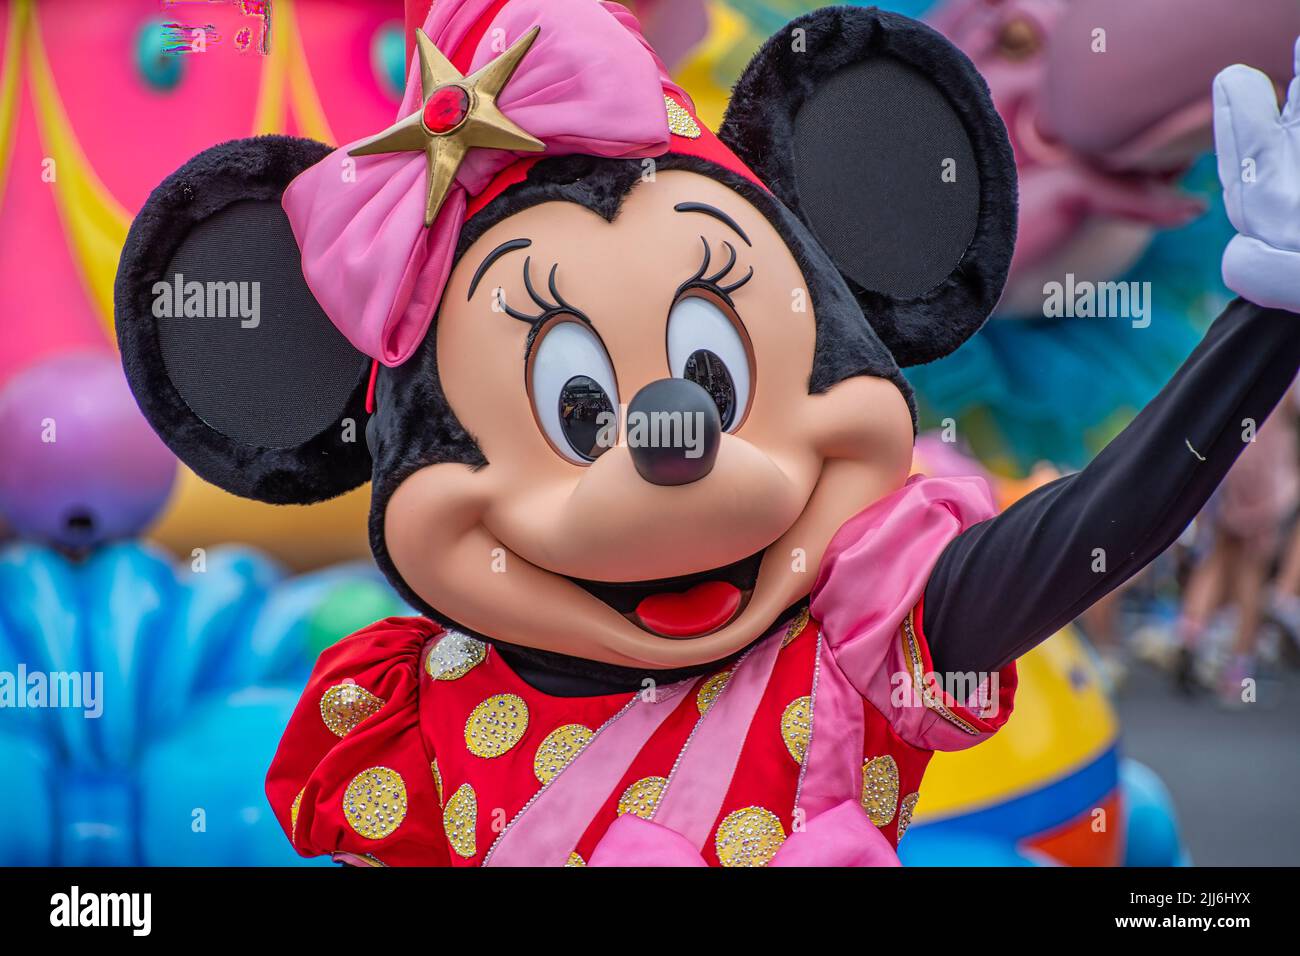 Disneys Minnie Mouse Character